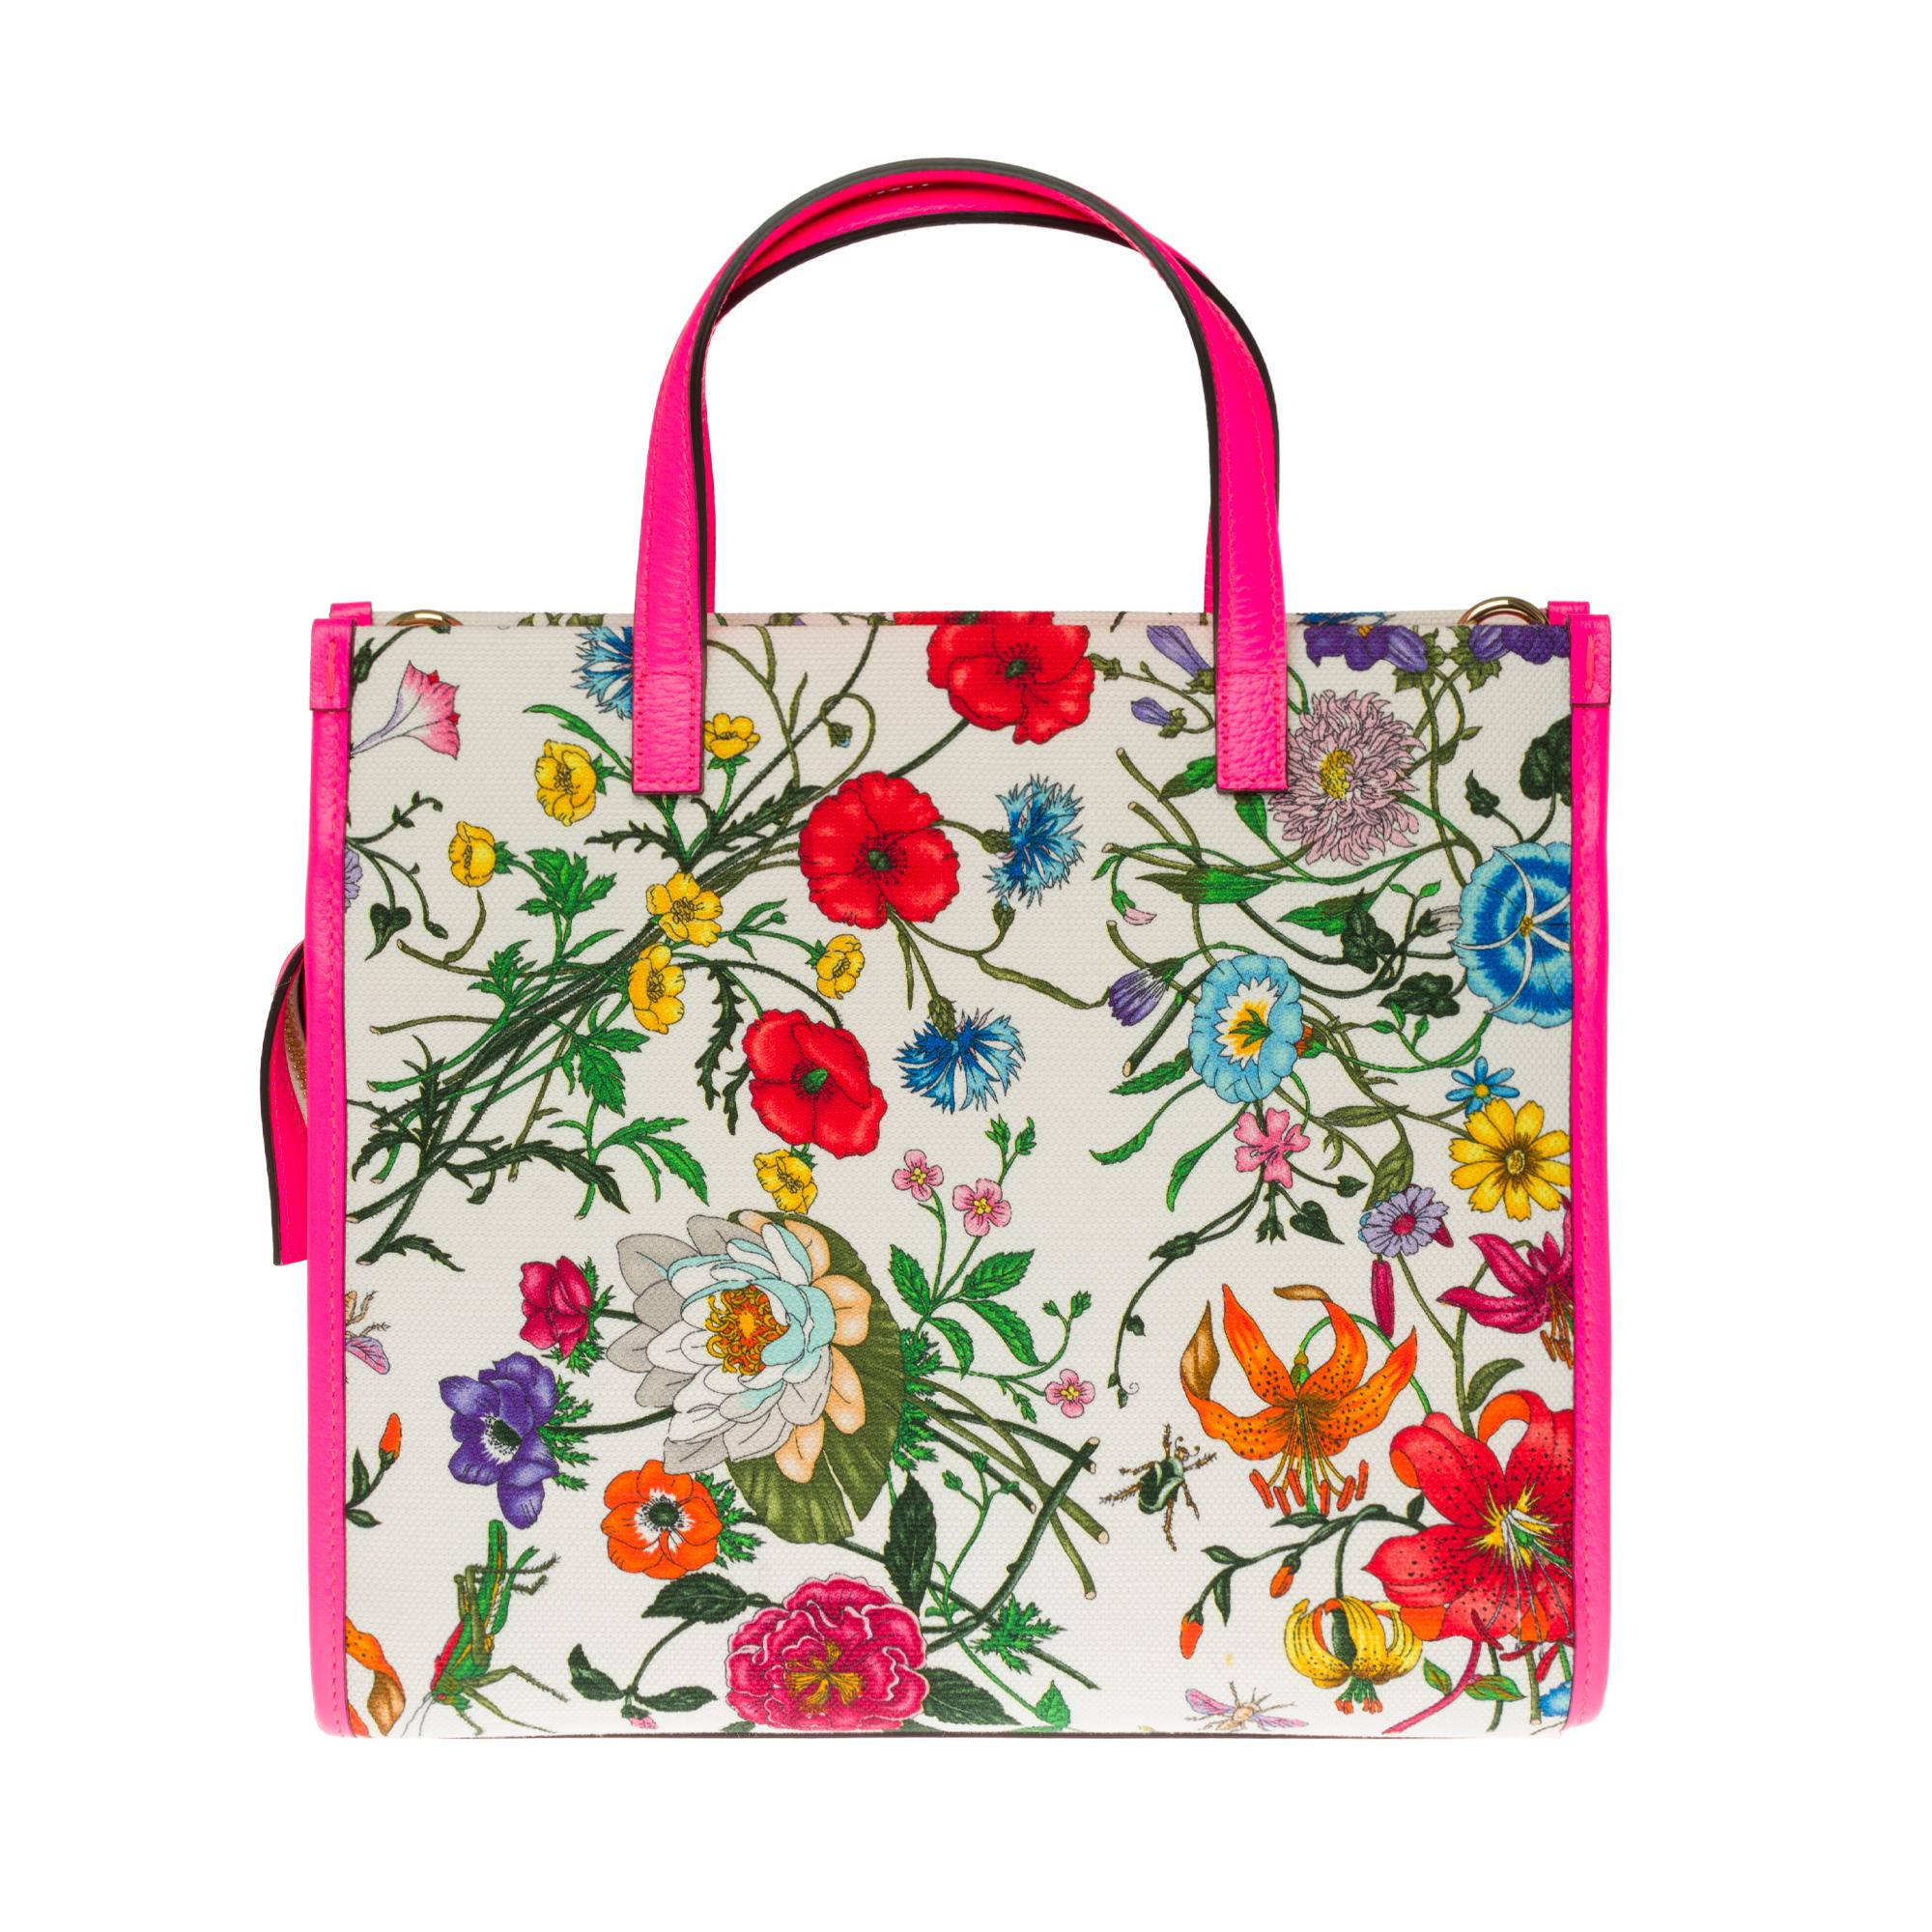 GUCCI Flora in Canvas and Leather with Nested G Tote Bag
Striking, playful and functional, this Flora tote comes from the Gucci house and offers style goals with every swing and whirl. Made in Italy, it has been meticulously made from multicoloured